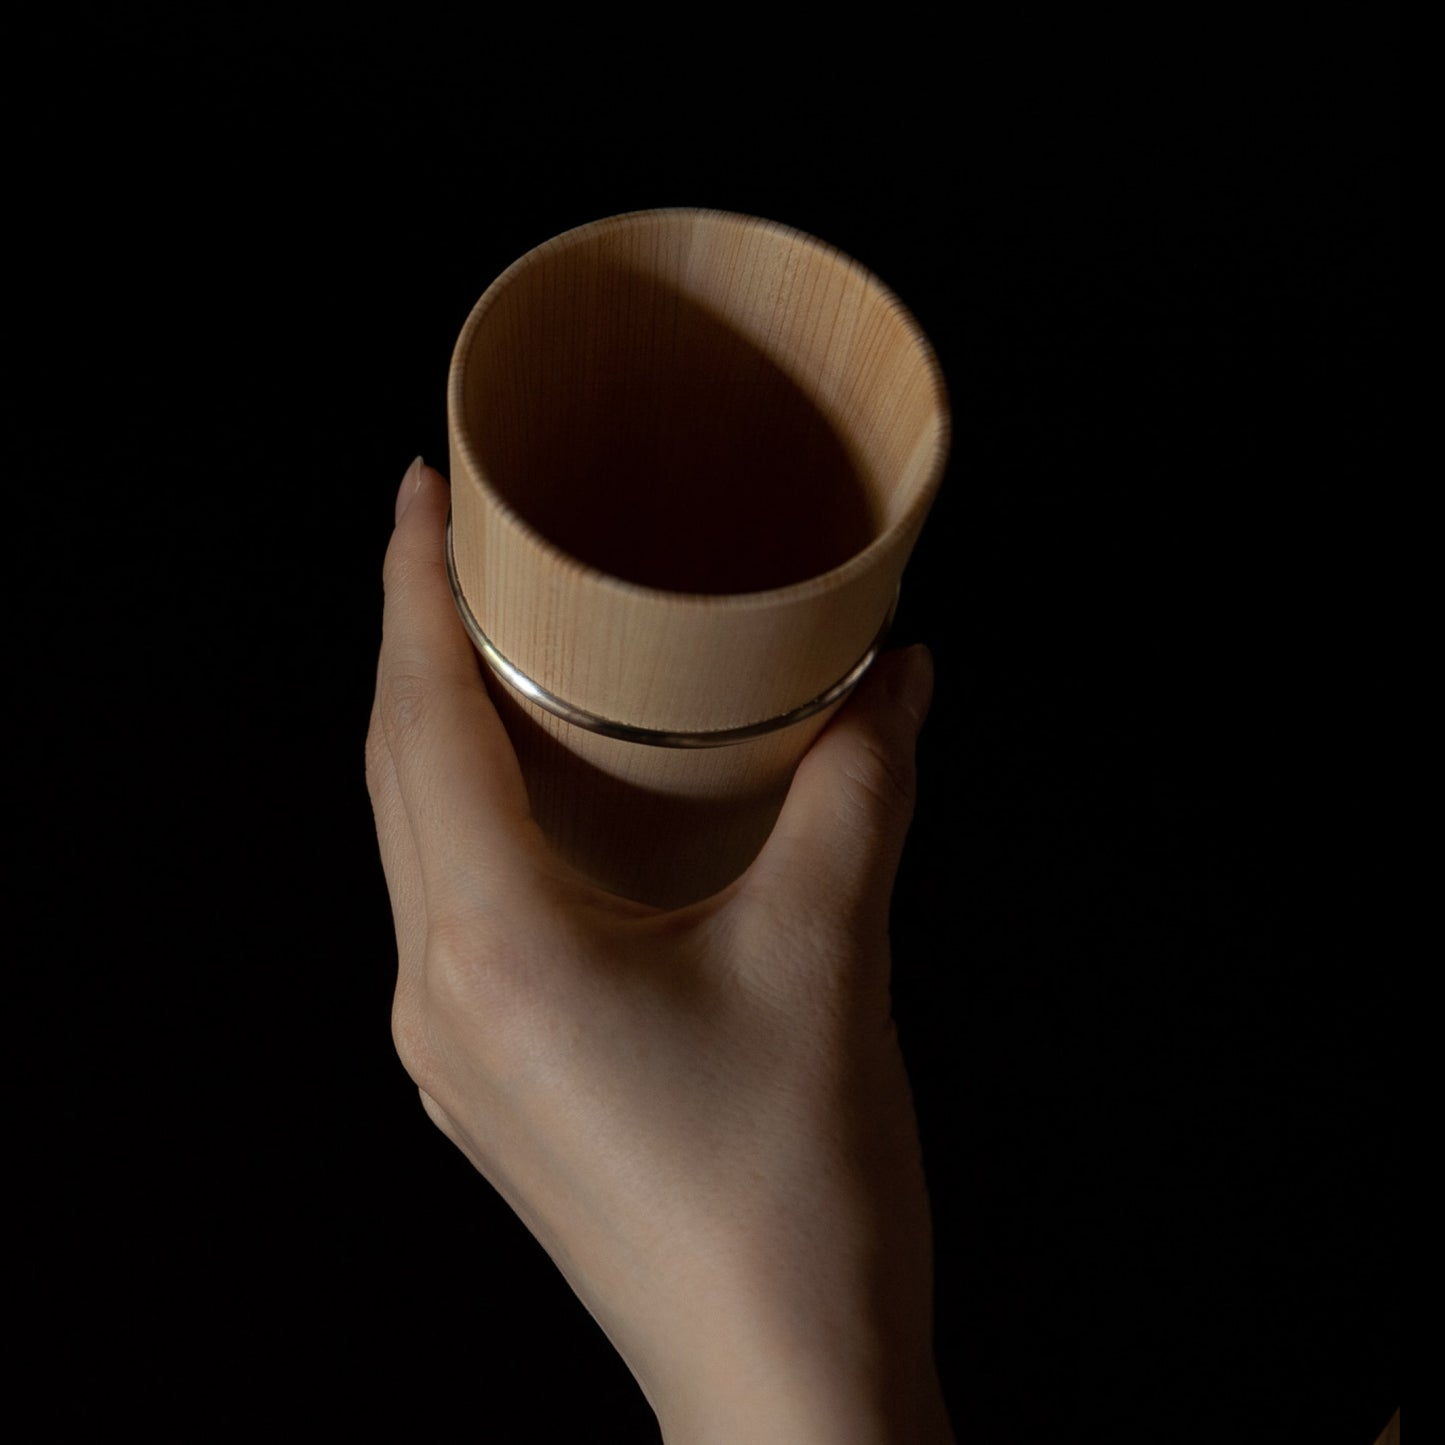 Hand holding wooden Hinoki cup with metal bands